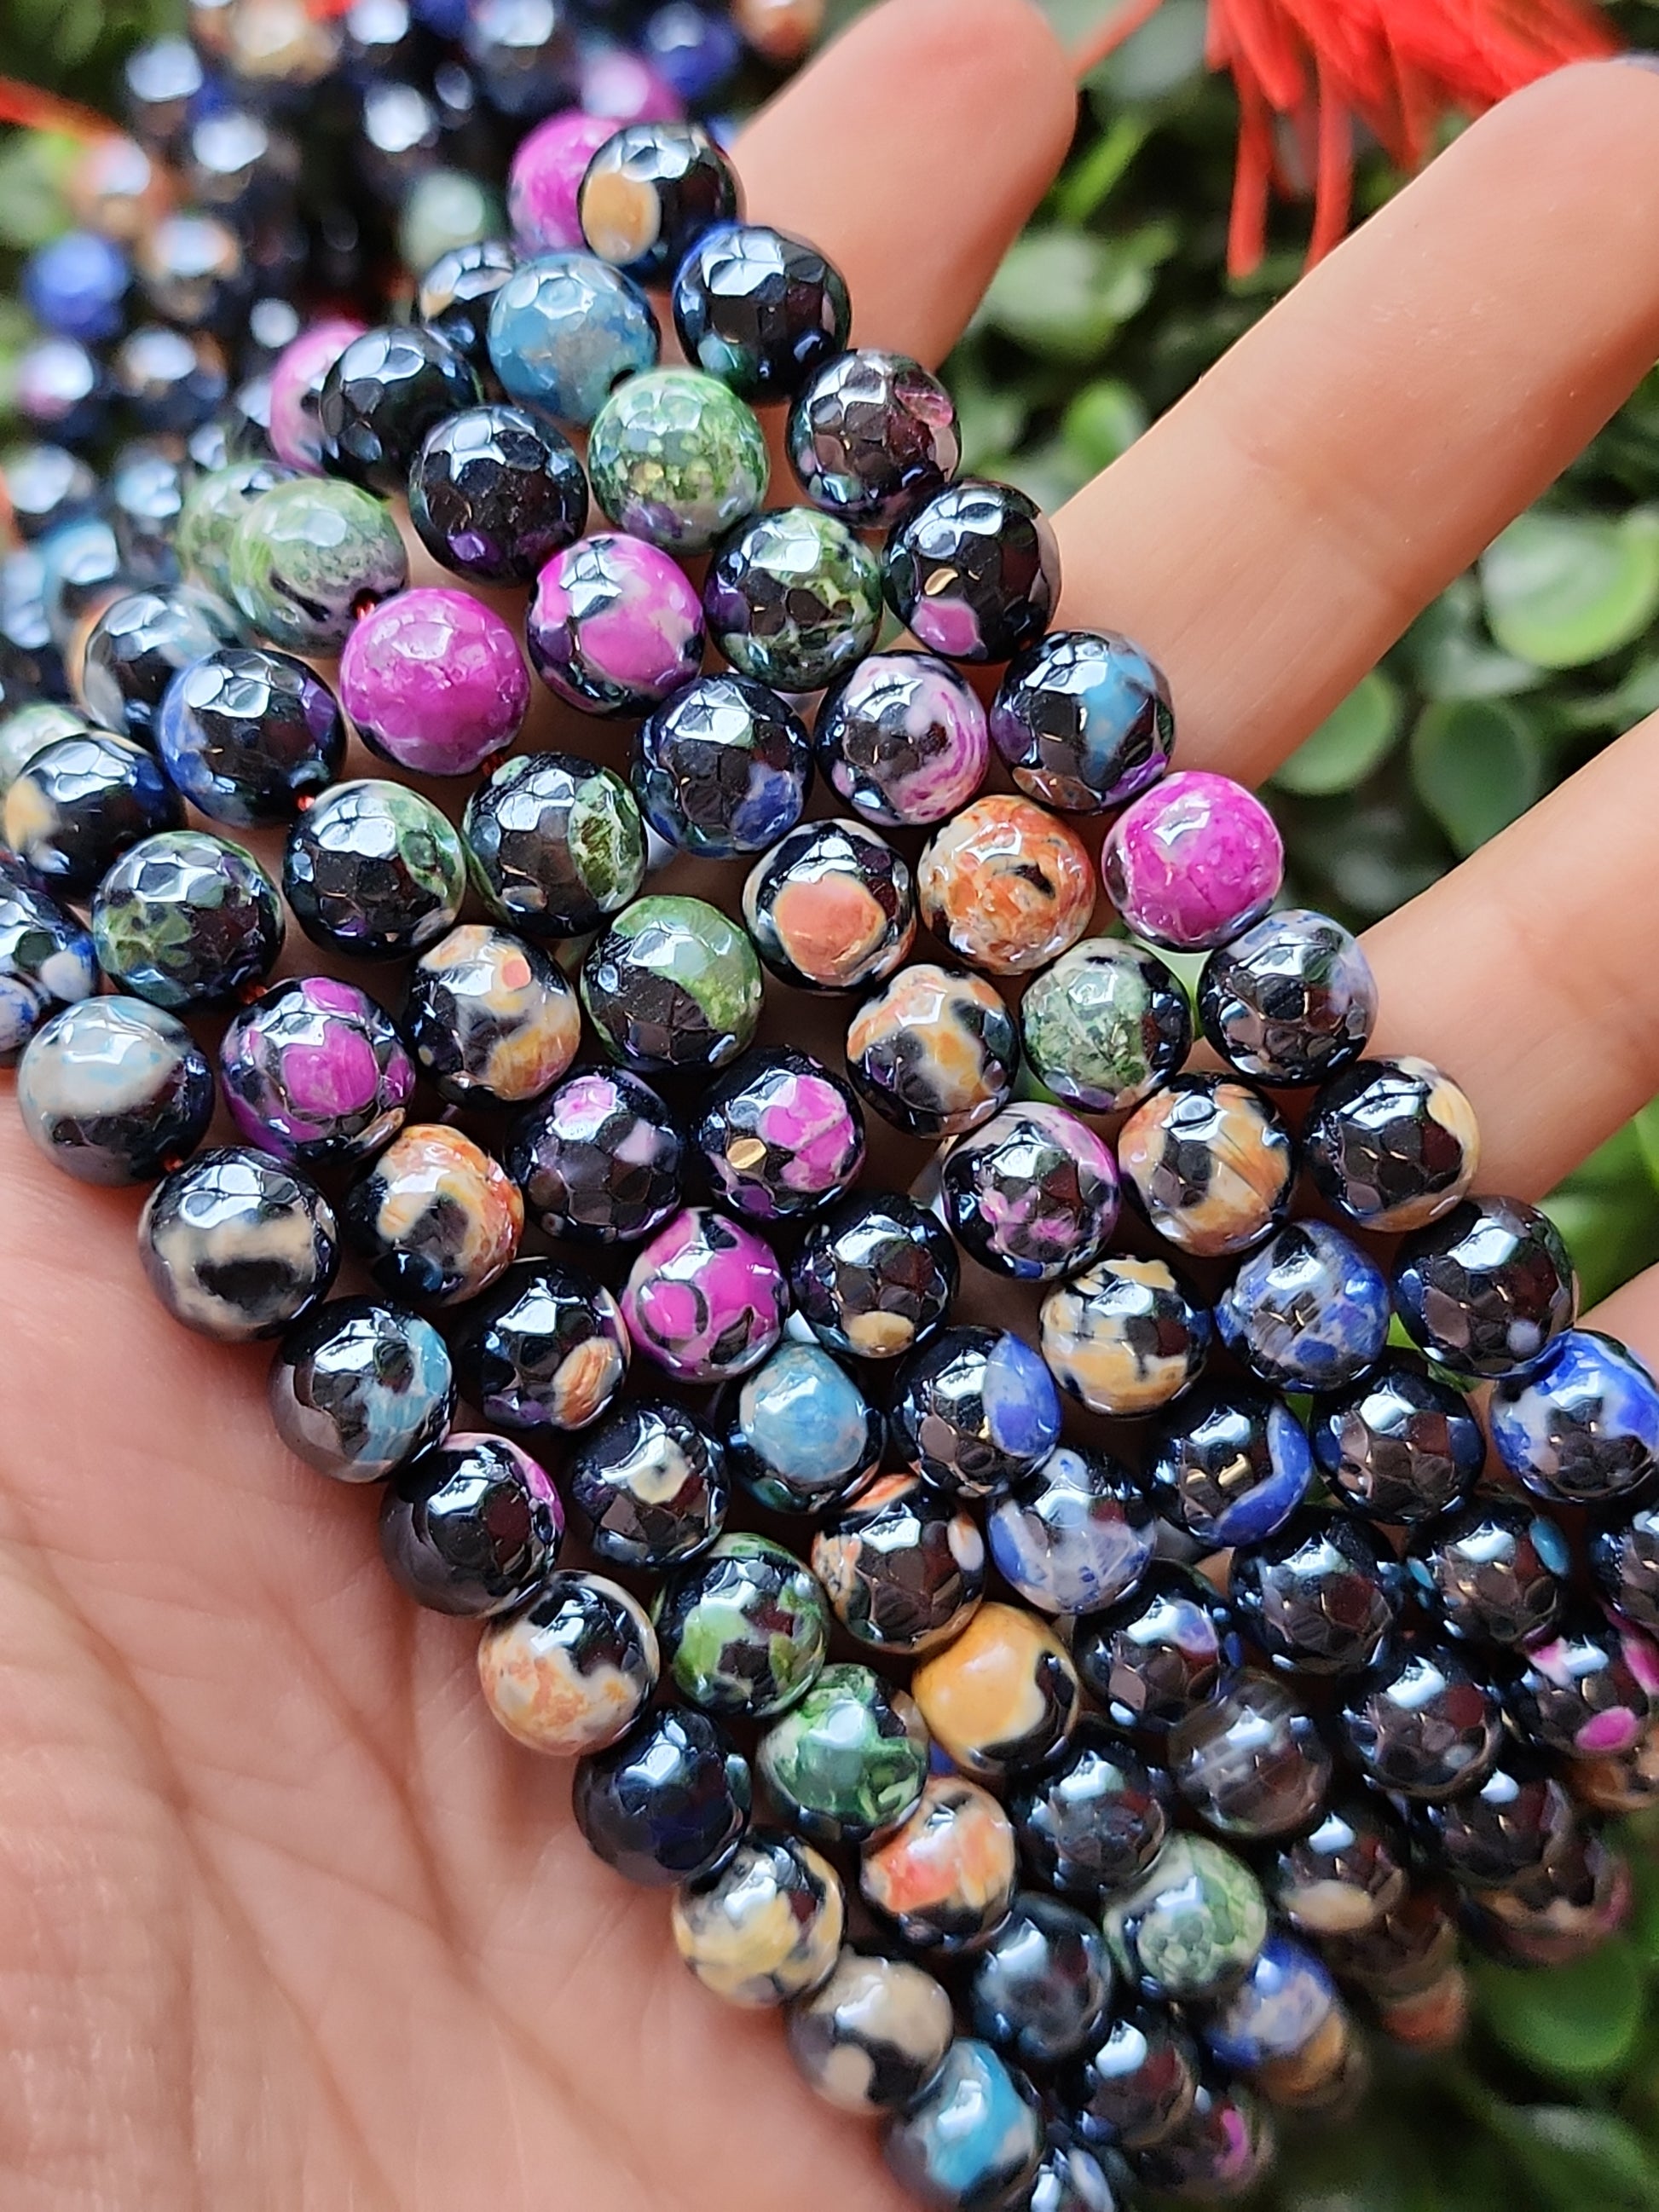 Crafting supplies such as fire agate beads available at wholesale and retail prices, only at our crystal shop in San Diego!